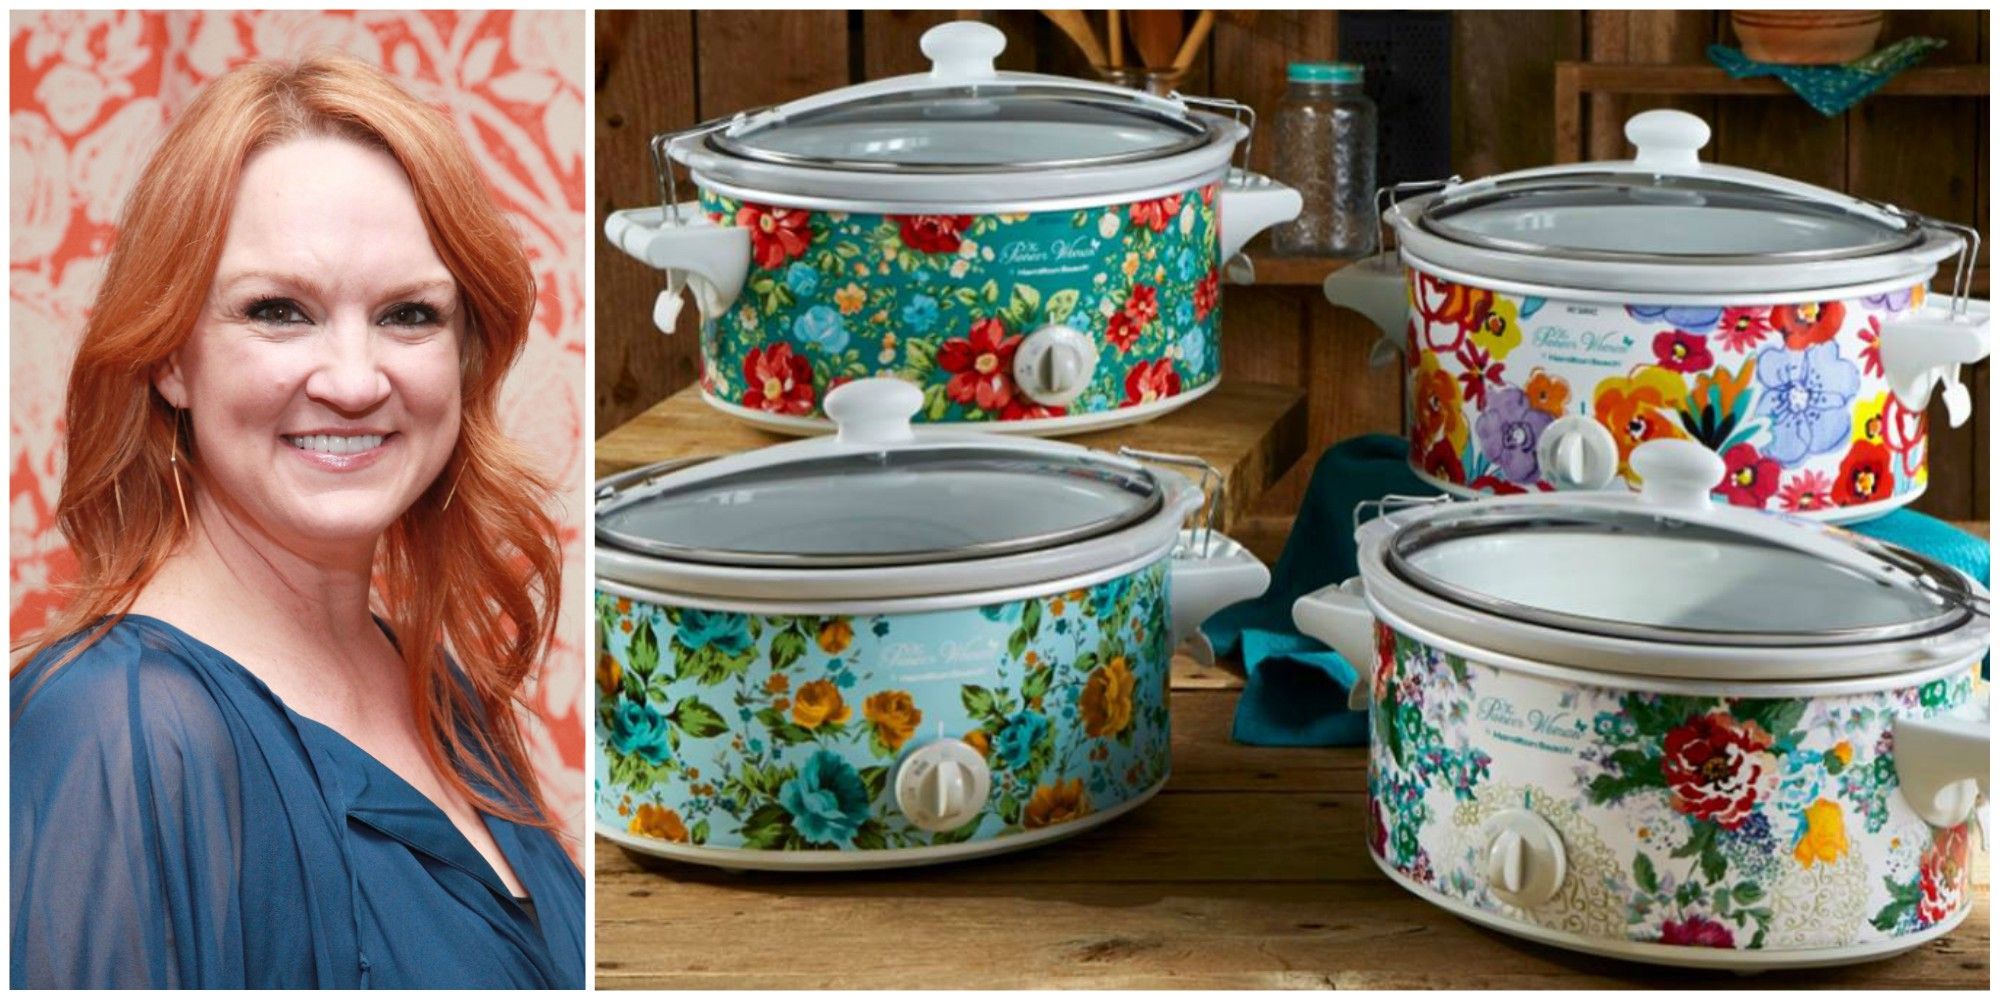 https://hips.hearstapps.com/countryliving/assets/17/38/1505759562-ree-drummond-the-pioneer-woman-slow-cookers.jpg